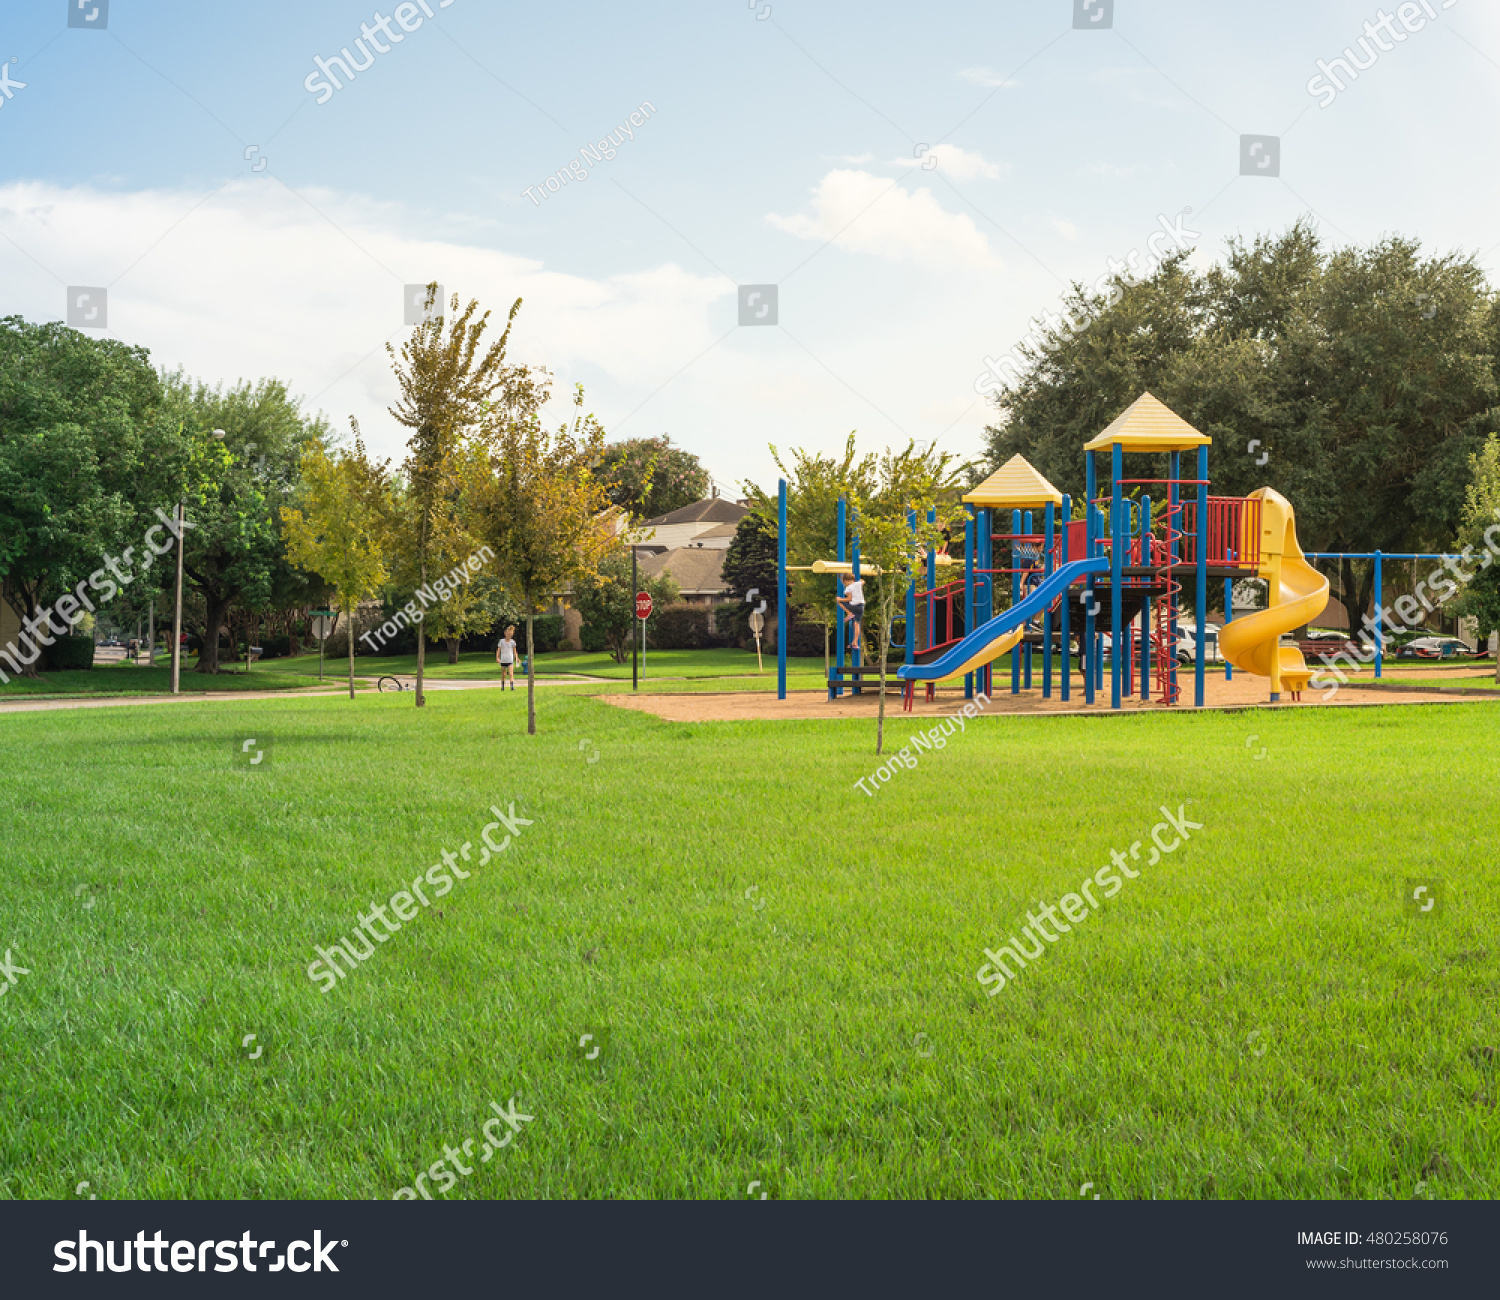 Colorful children playground activities in public park surrounded by green trees at sunset in Houston, Texas. Children run, slide, swing on modern playground. Urban neighborhood childhood concept. #480258076